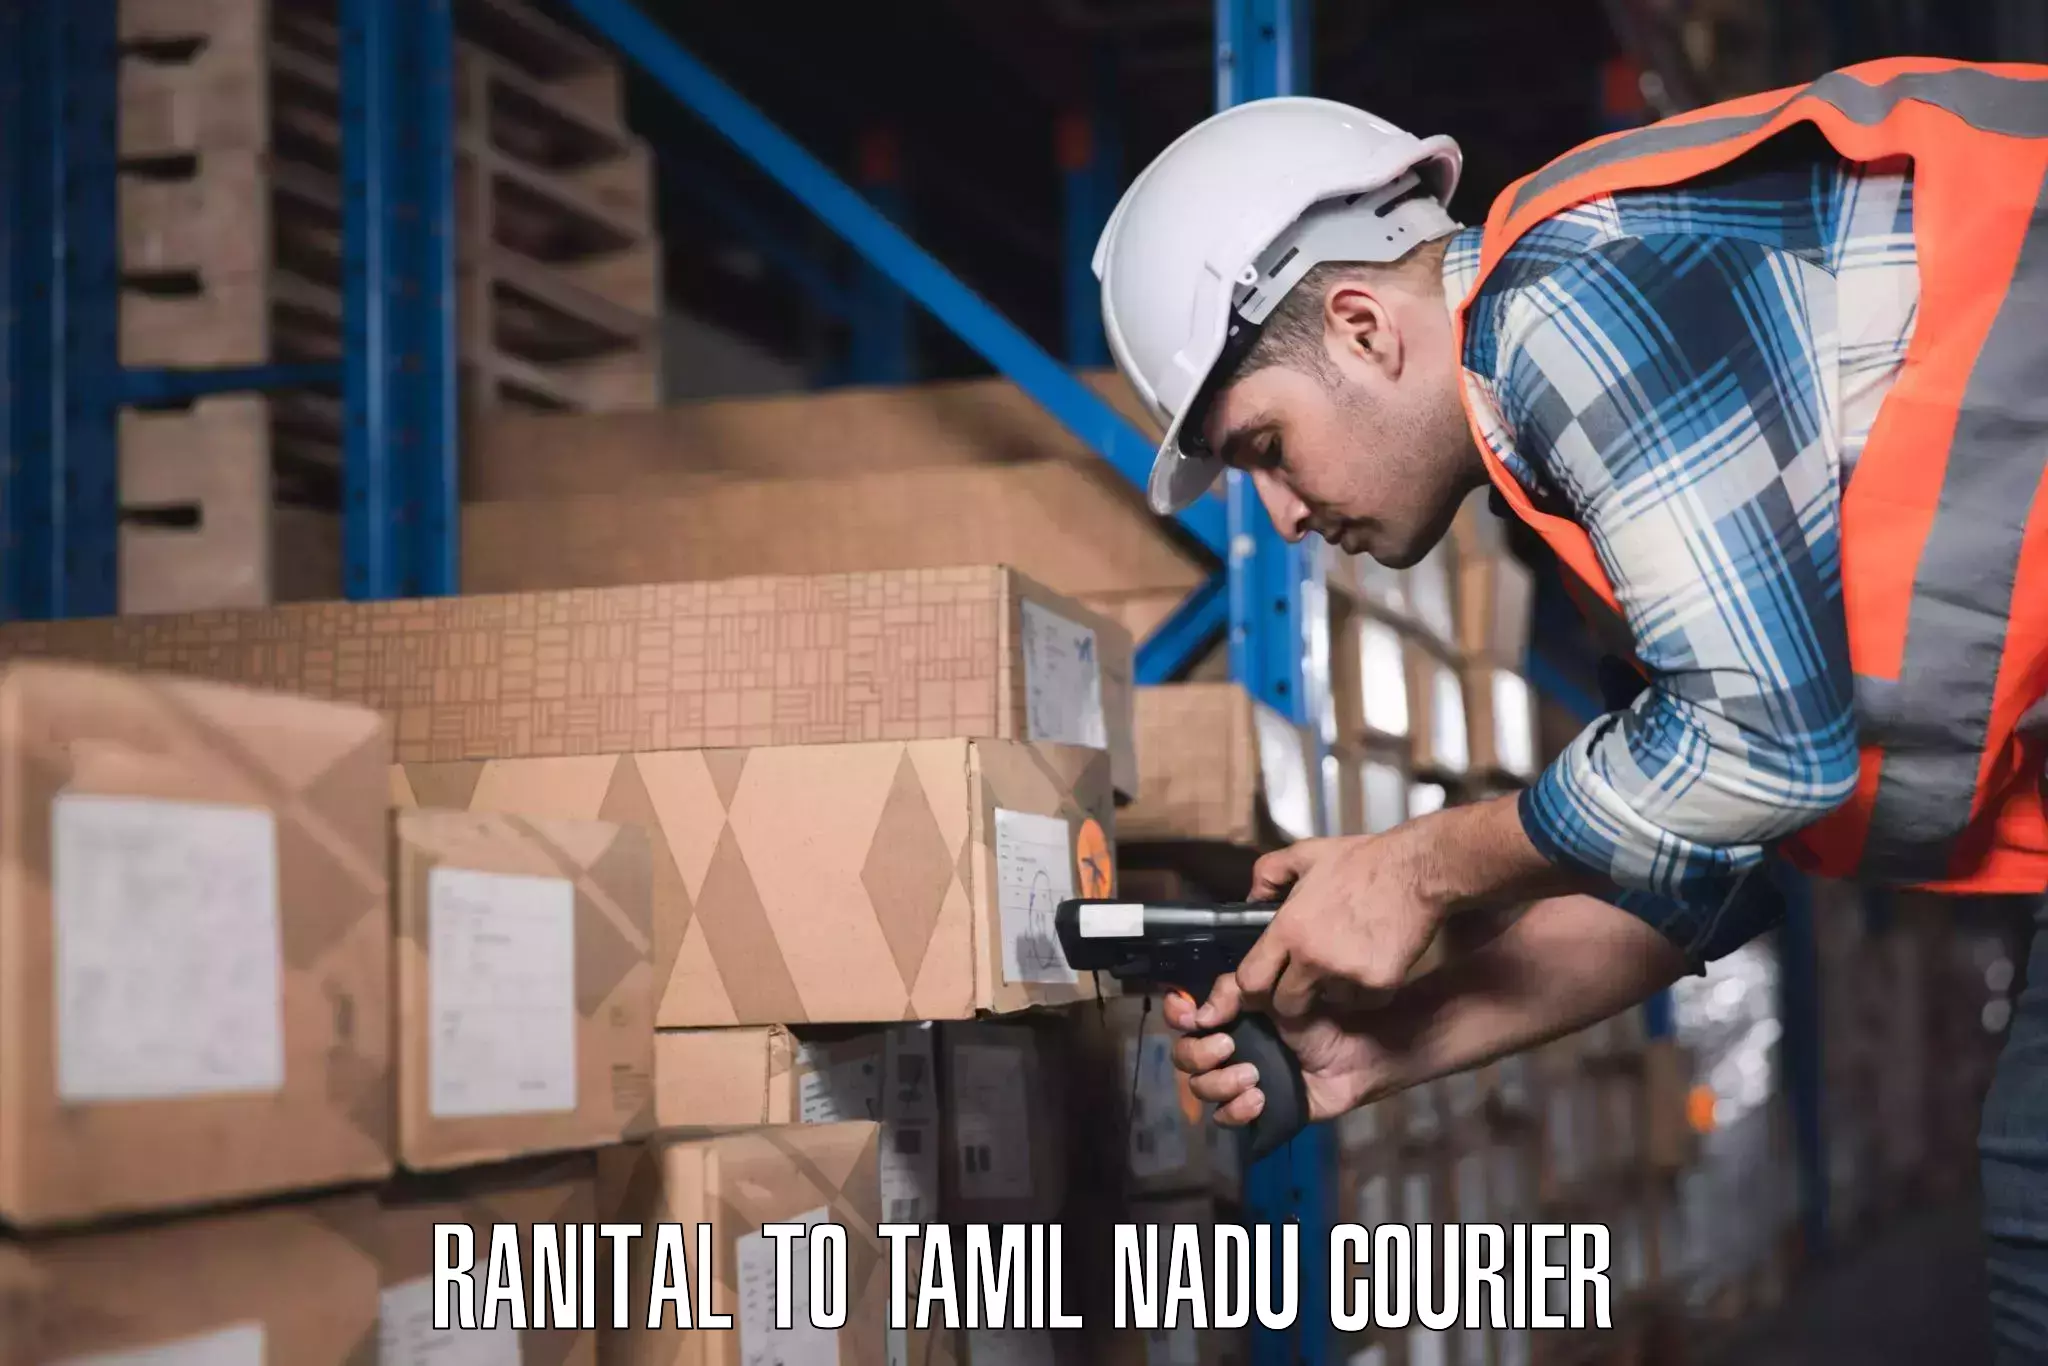 Luggage shipping guide Ranital to SRM Institute of Science and Technology Chennai